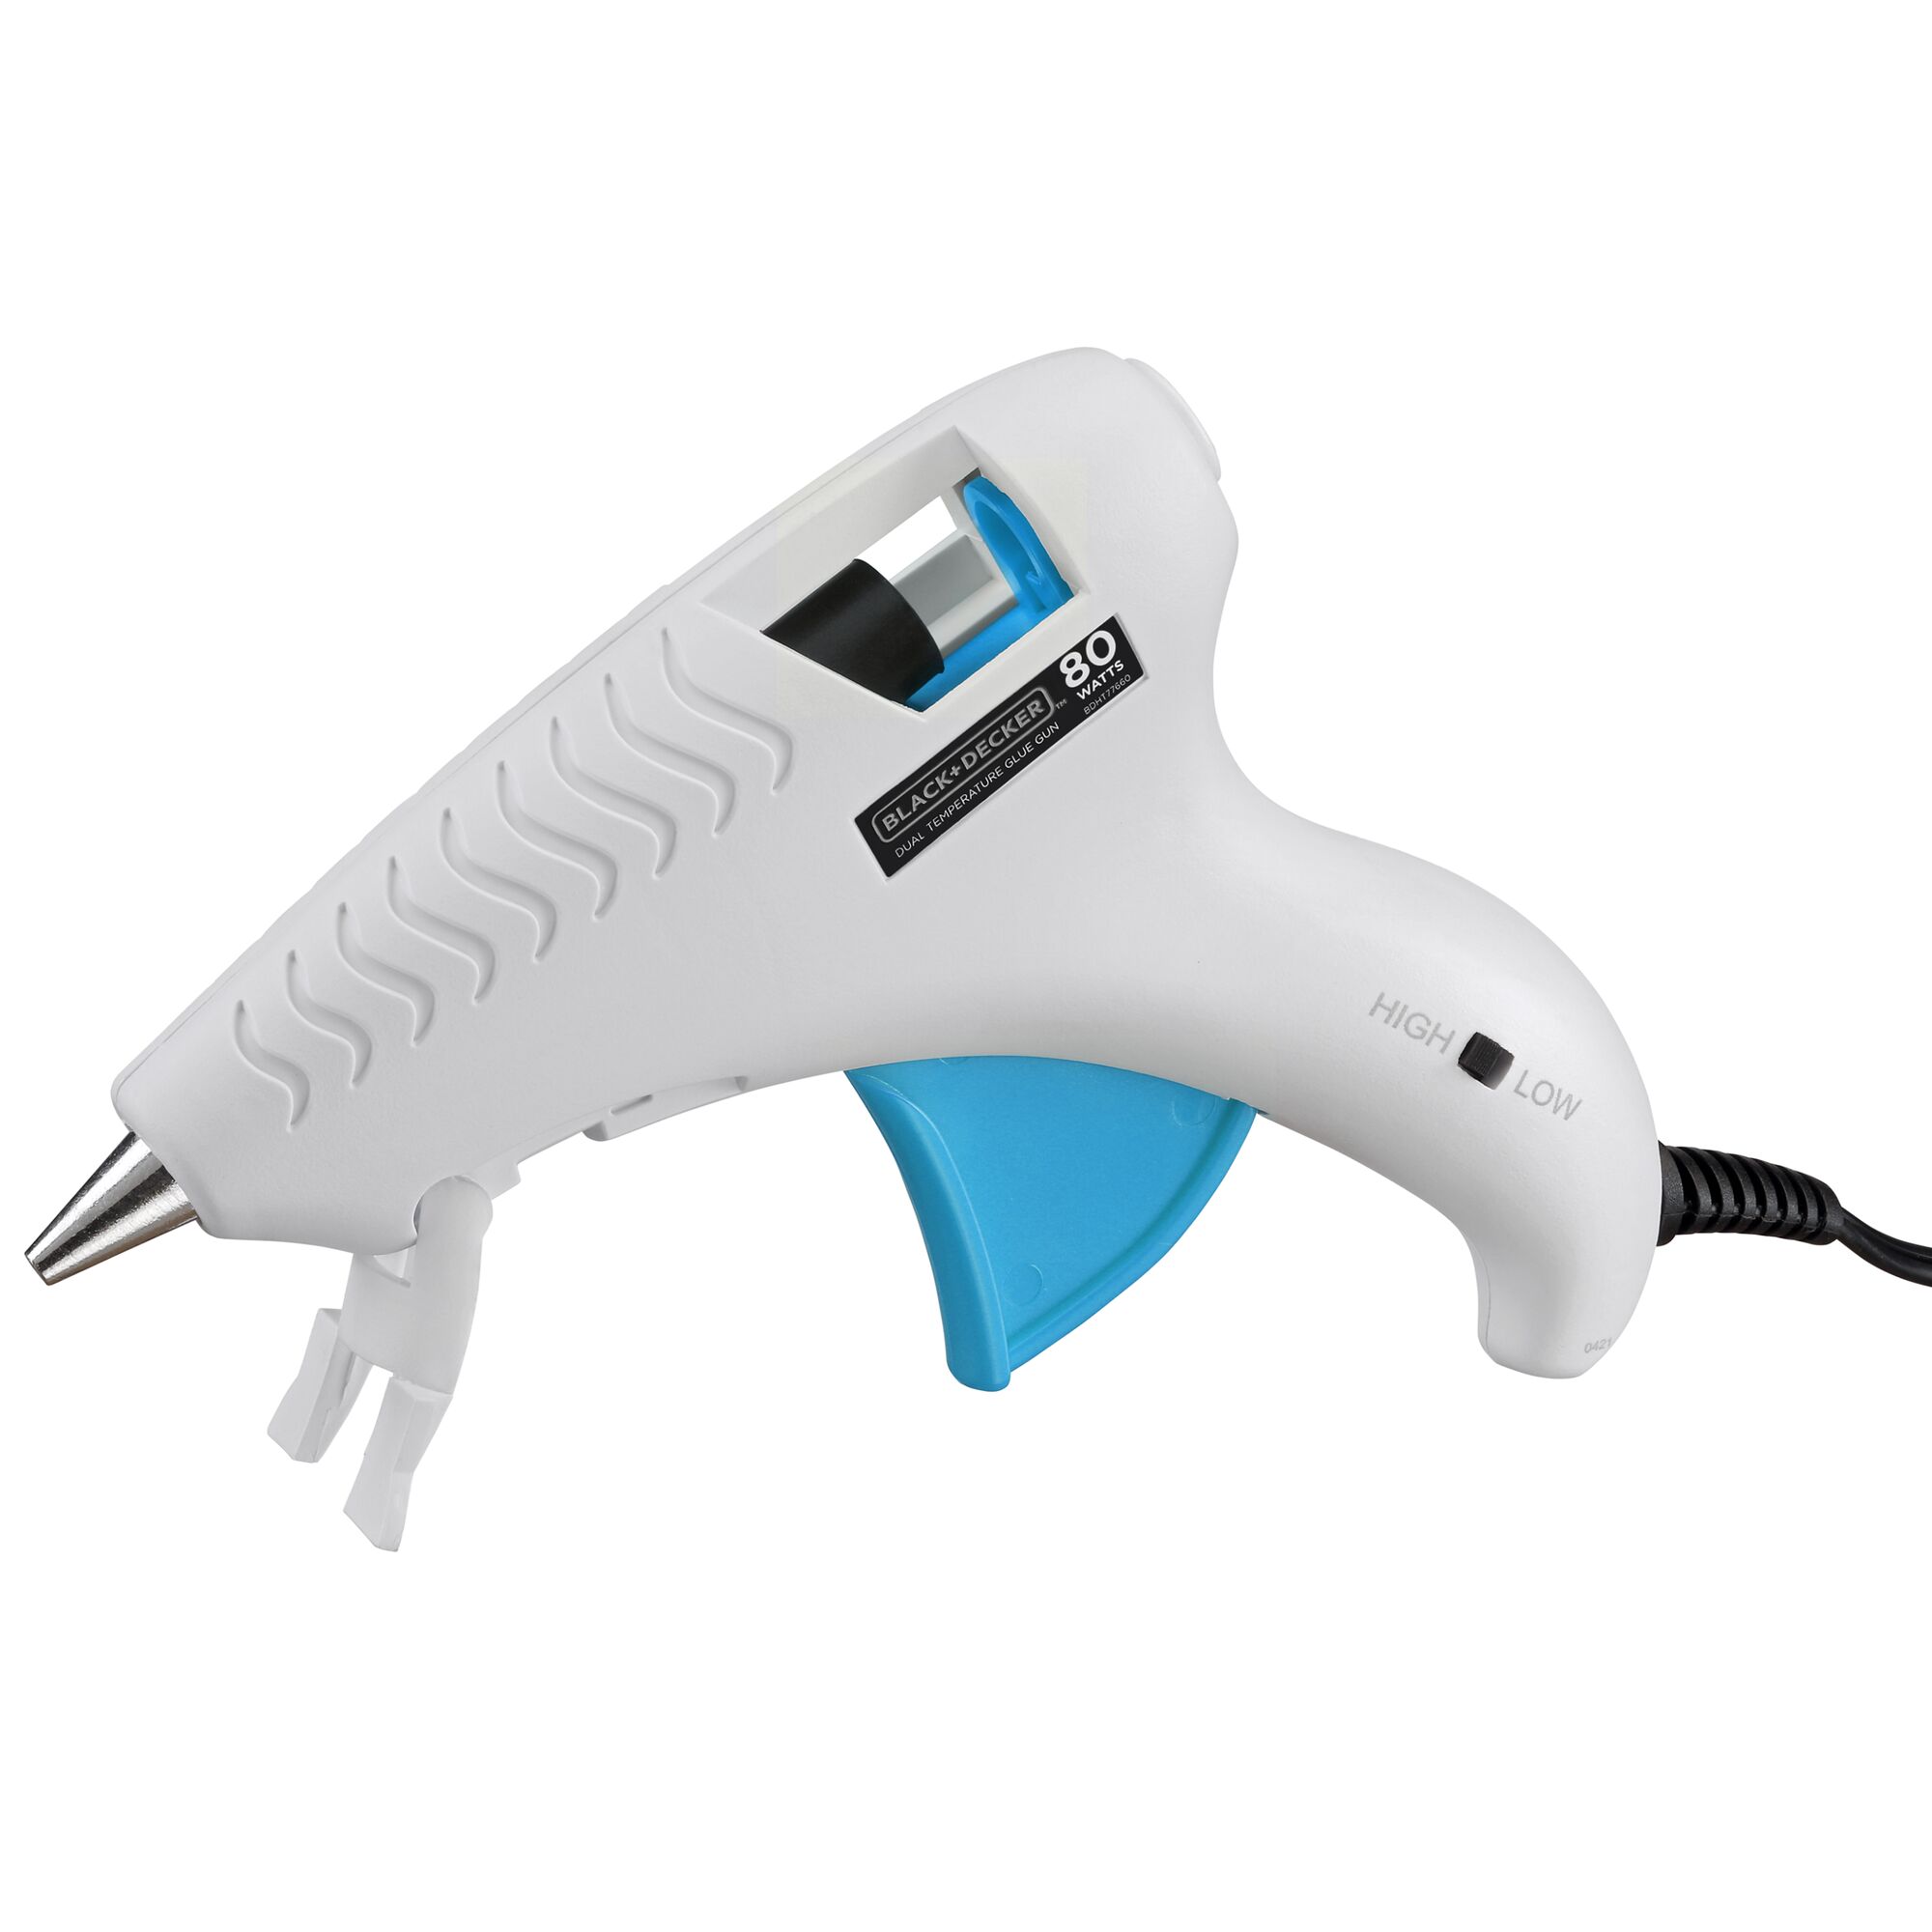 BLACK+DECKER corded glue gun resting on built-in stand without glue stick in chamber